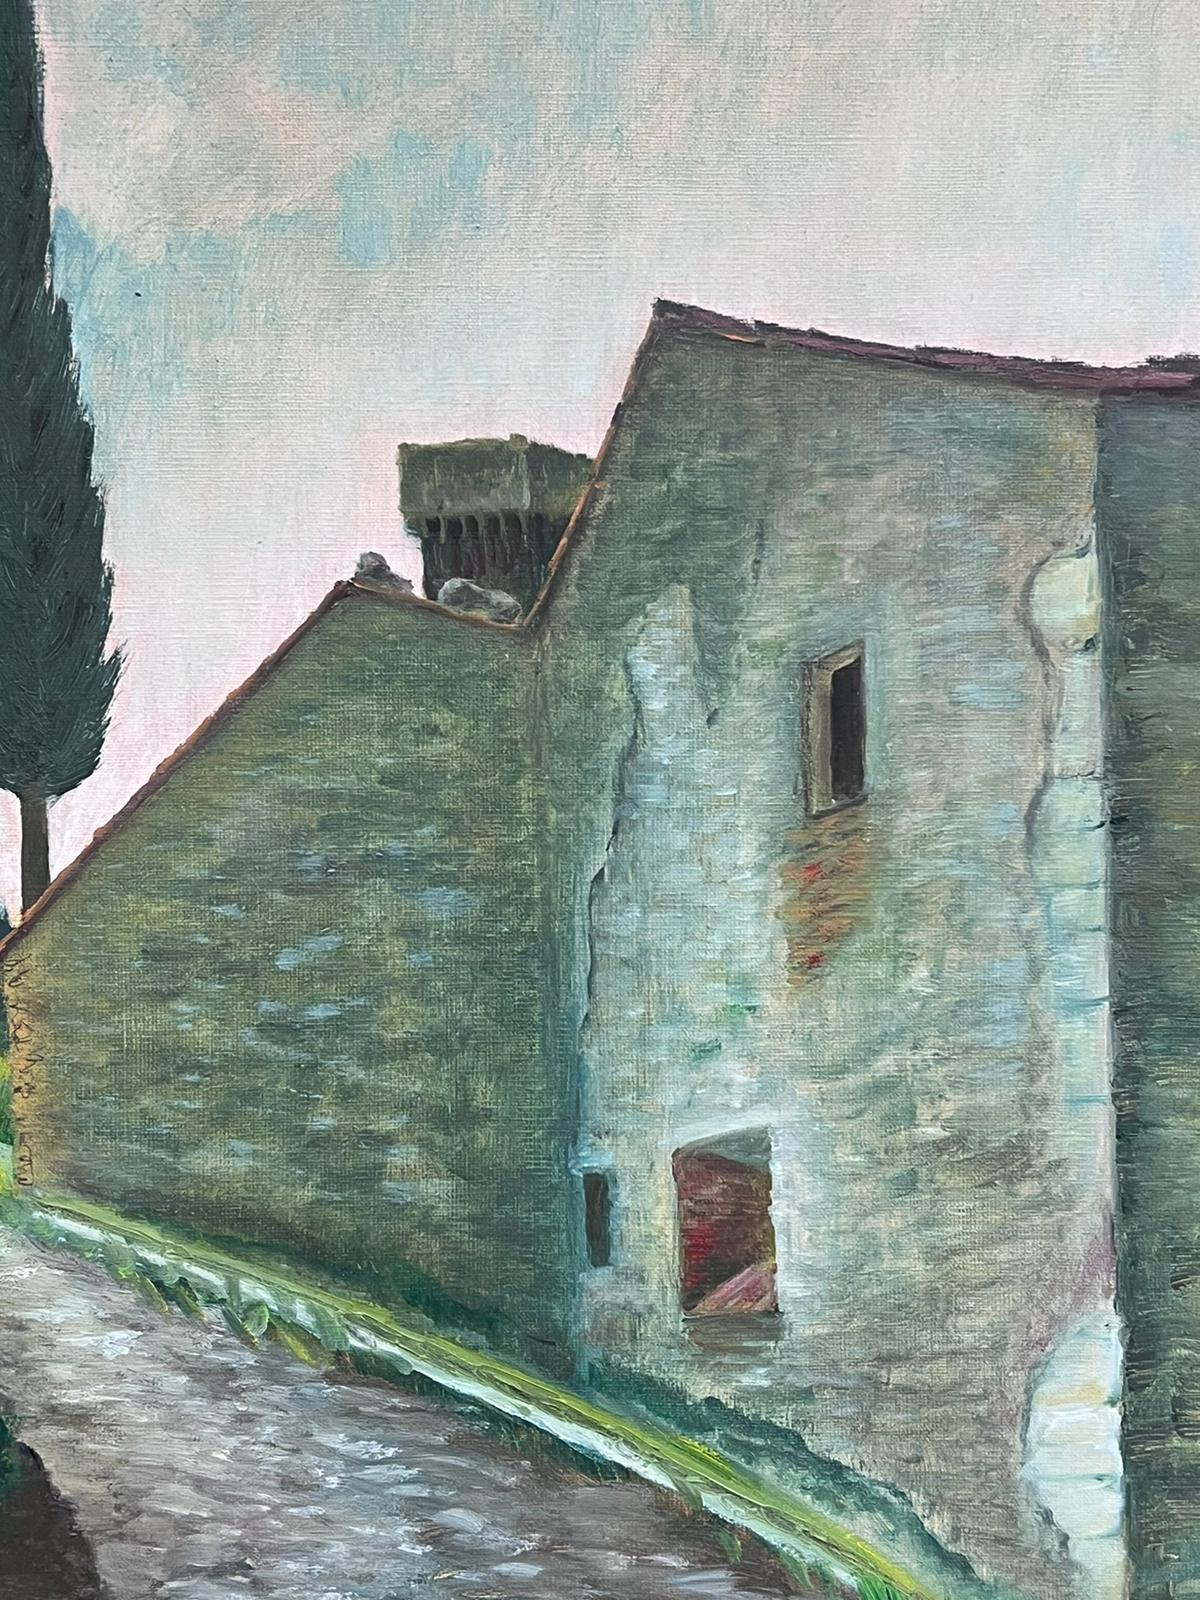 The Cypress Tree
Italian School, mid 20th century
indistinctly signed oil on canvas, framed
framed: 25 x 19 inches
canvas: 20 x 14 inches
provenance: private collection, France
condition: very good and sound condition 